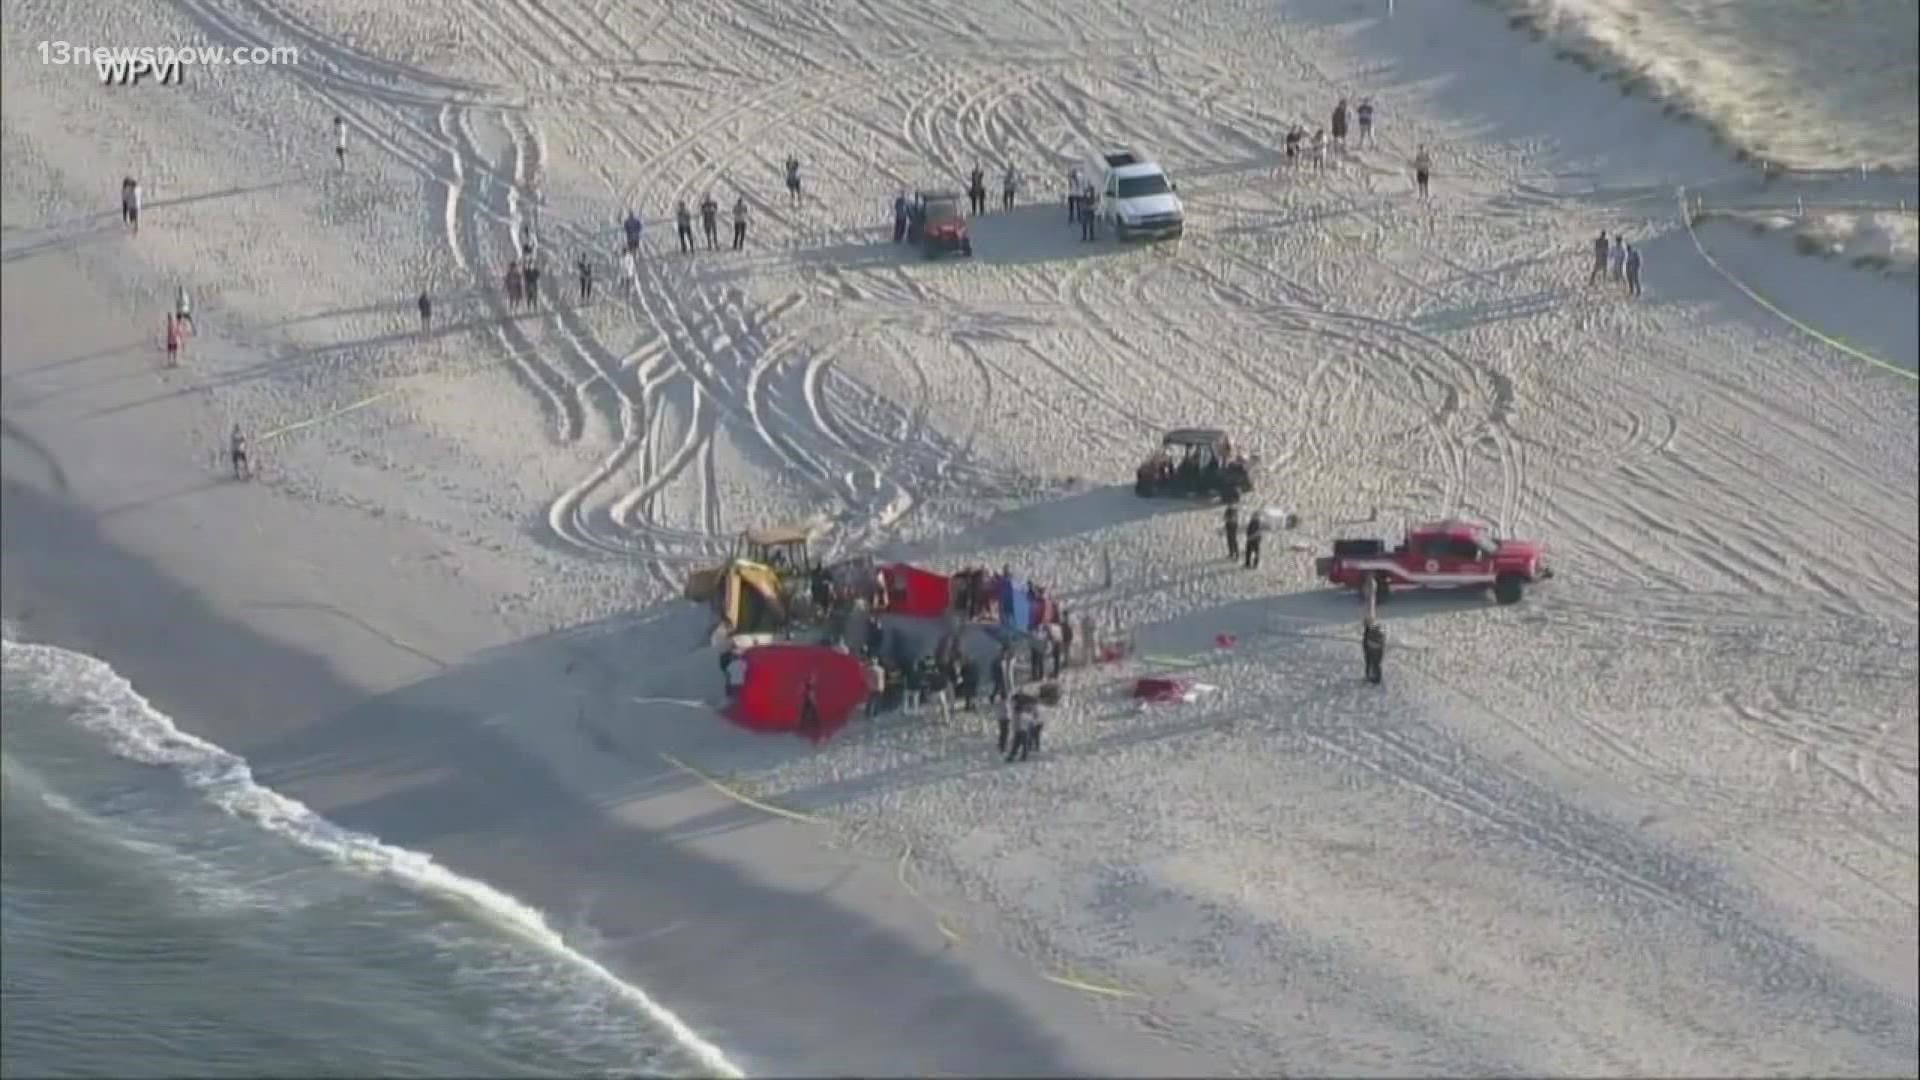 A teenager was killed after digging a hole in the sand on the New Jersey shore, ABC News reports.